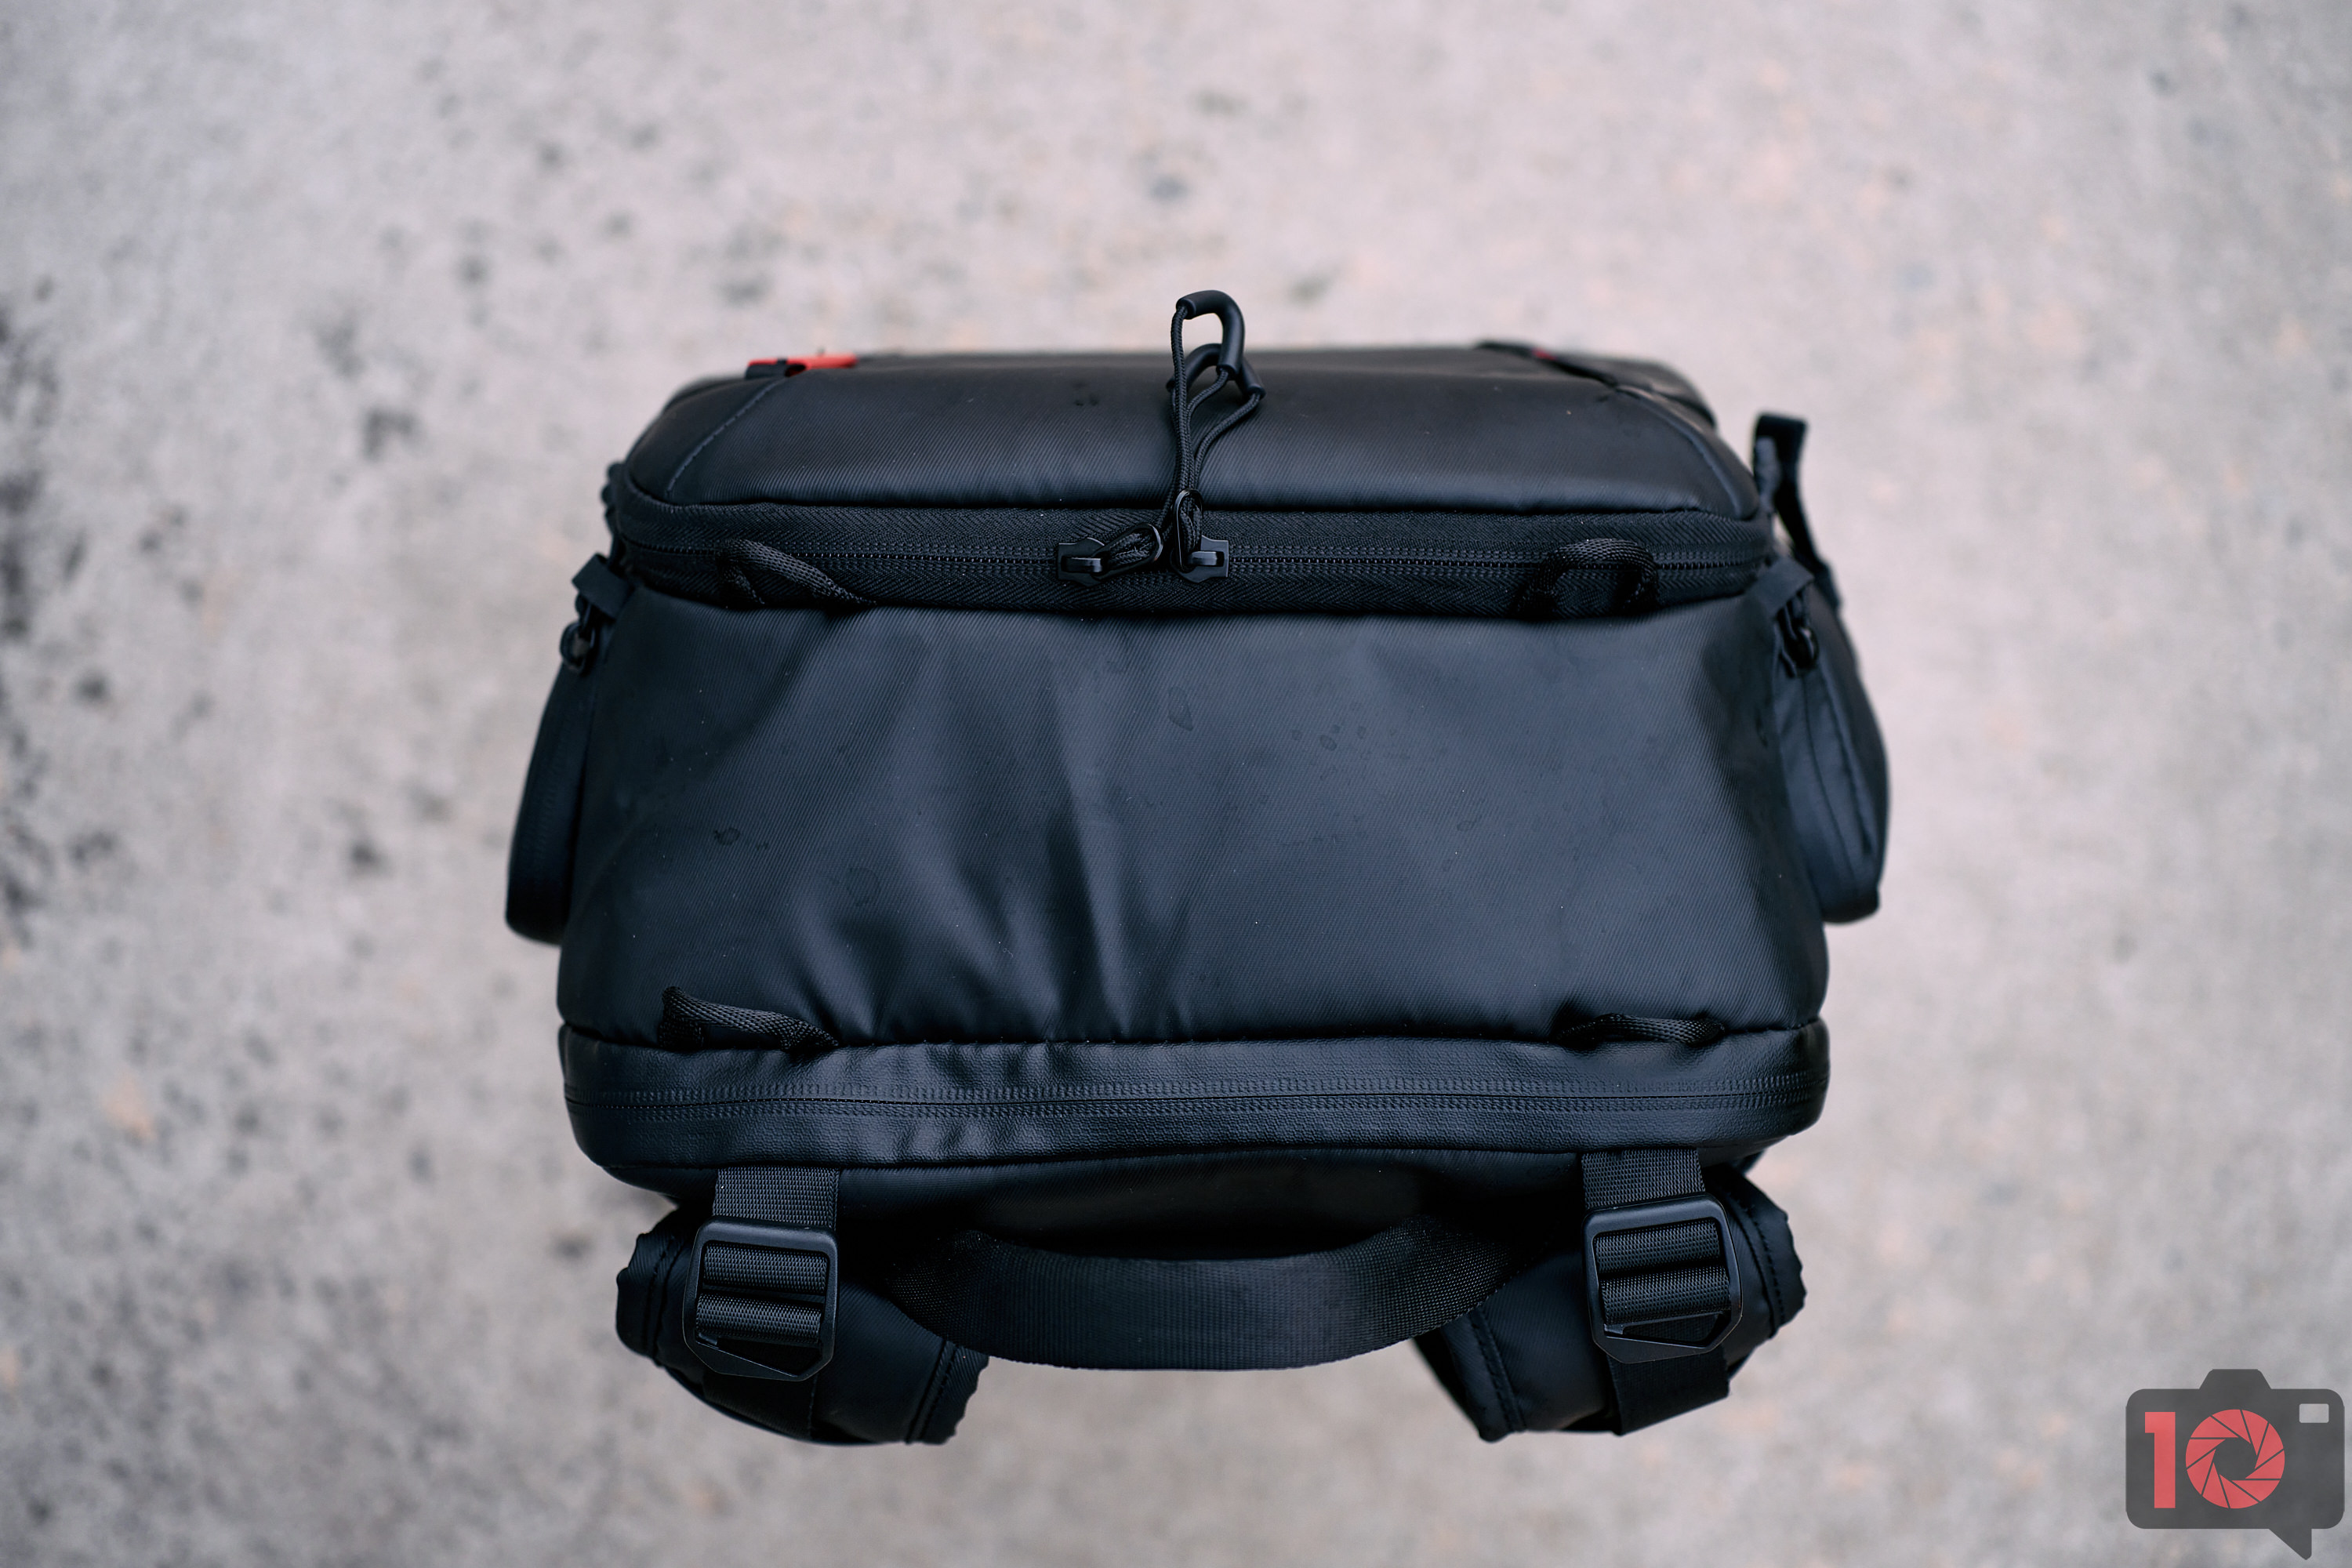 The Most Modular Camera Bag Yet? The OneMo Backpack 25L Review